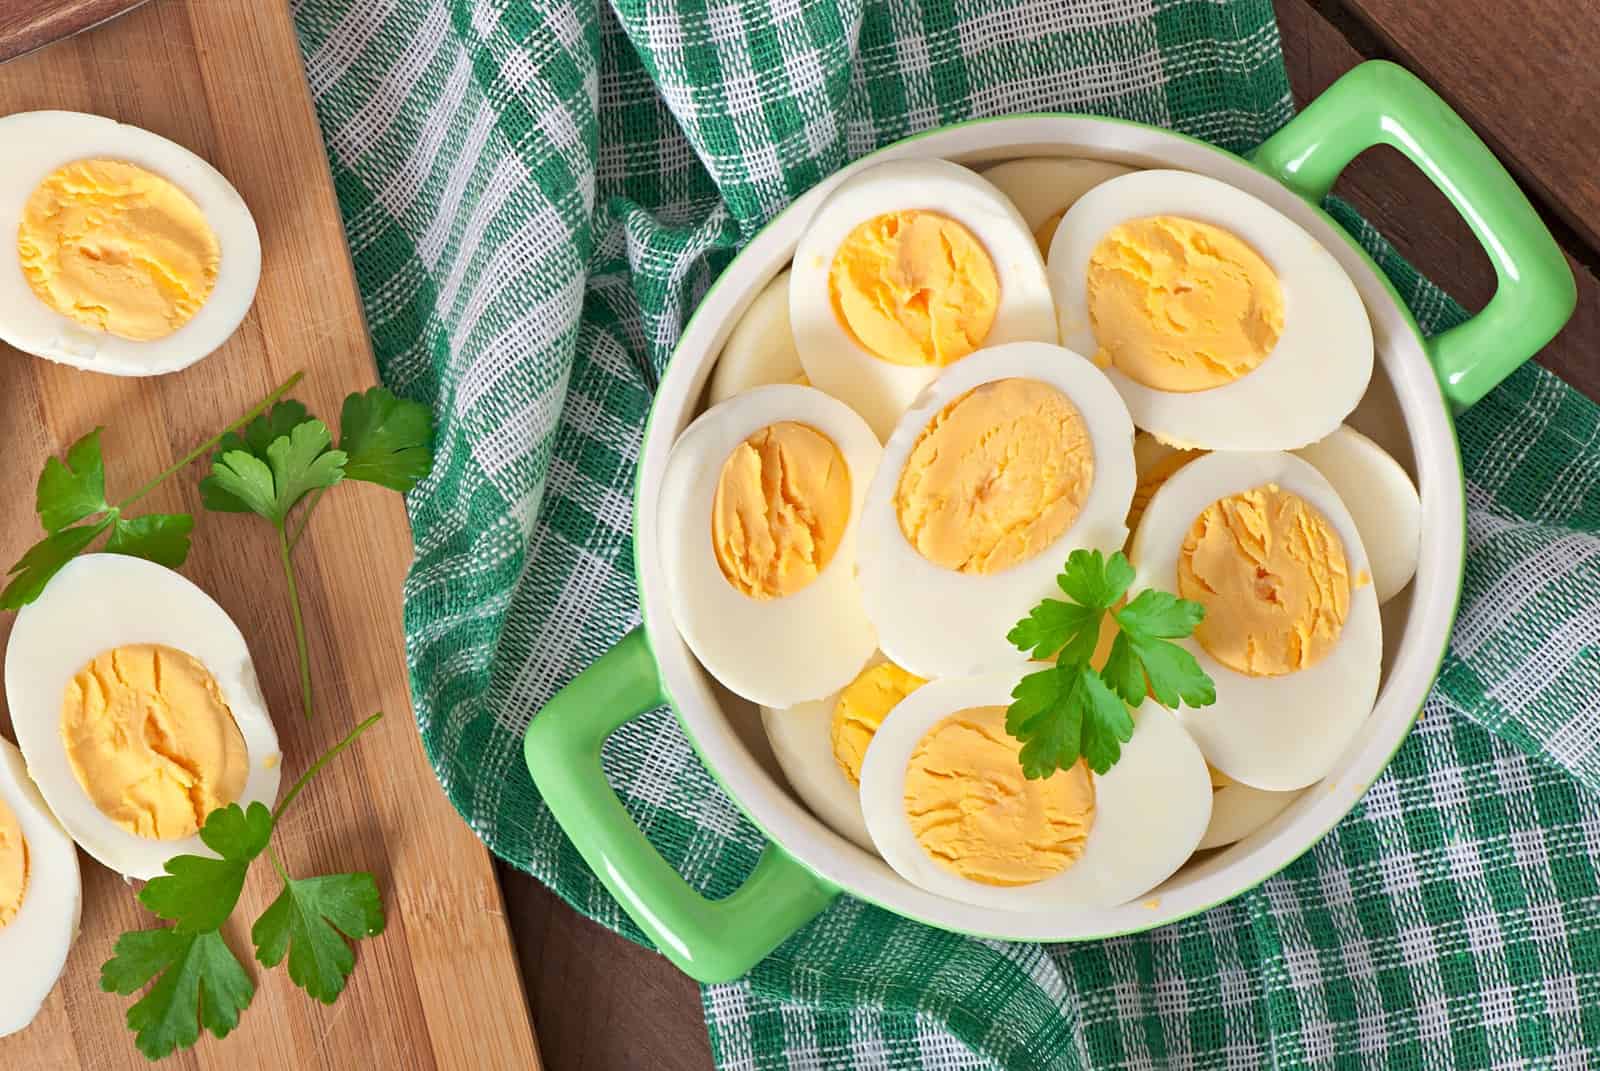 Easy Peel hard Boiled Eggs with Perfectly Cooked Yolks